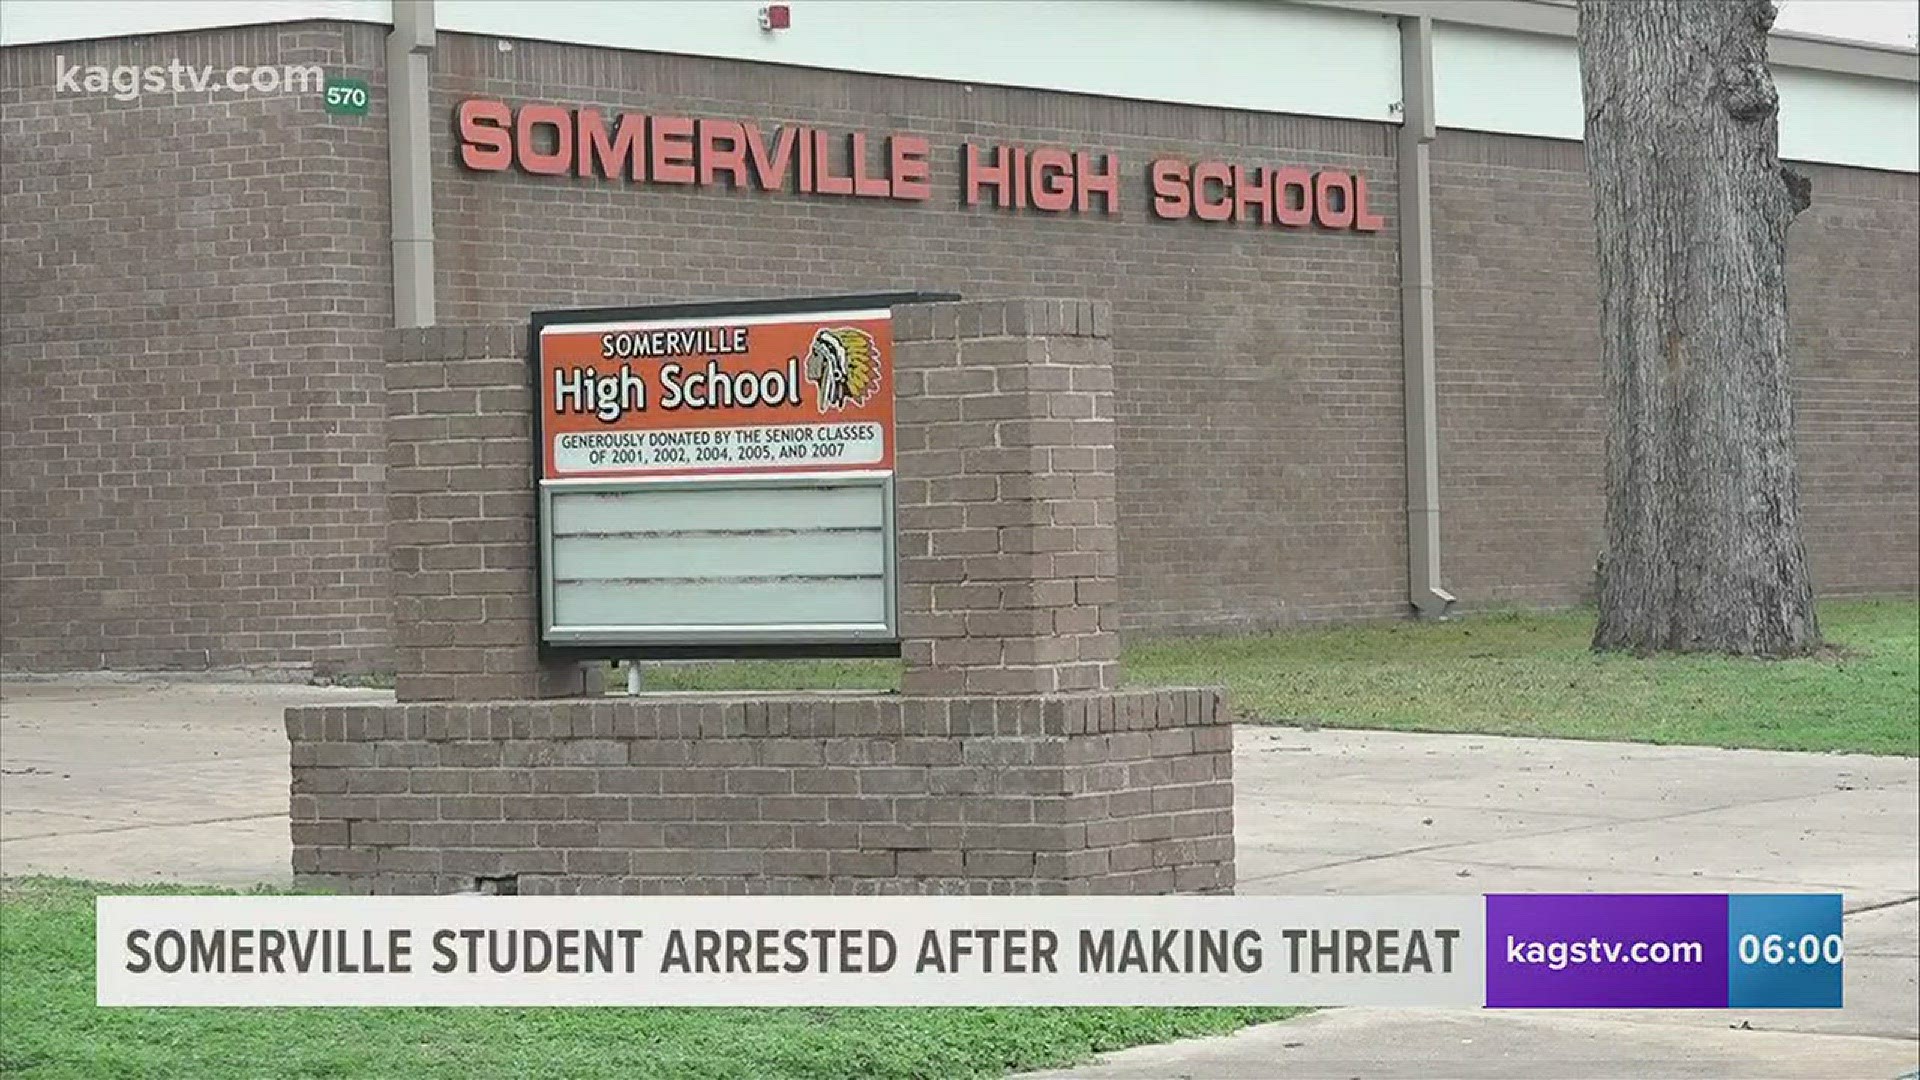 In Somerville a student was arrested on misdemeanor charges for making a terroristic threat against the school.